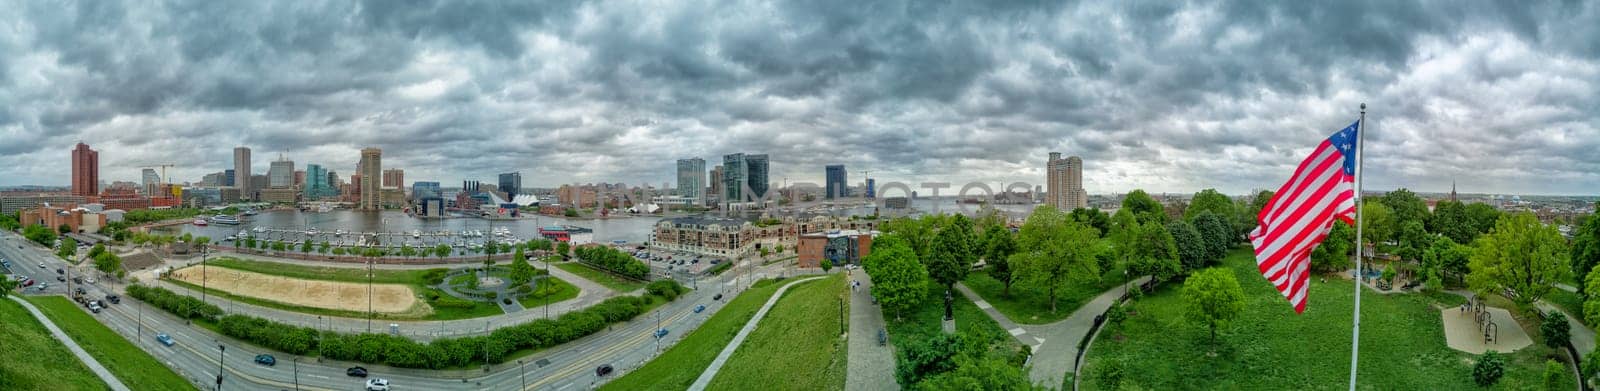 Baltimore aerial view panorama cityscape by AndreaIzzotti